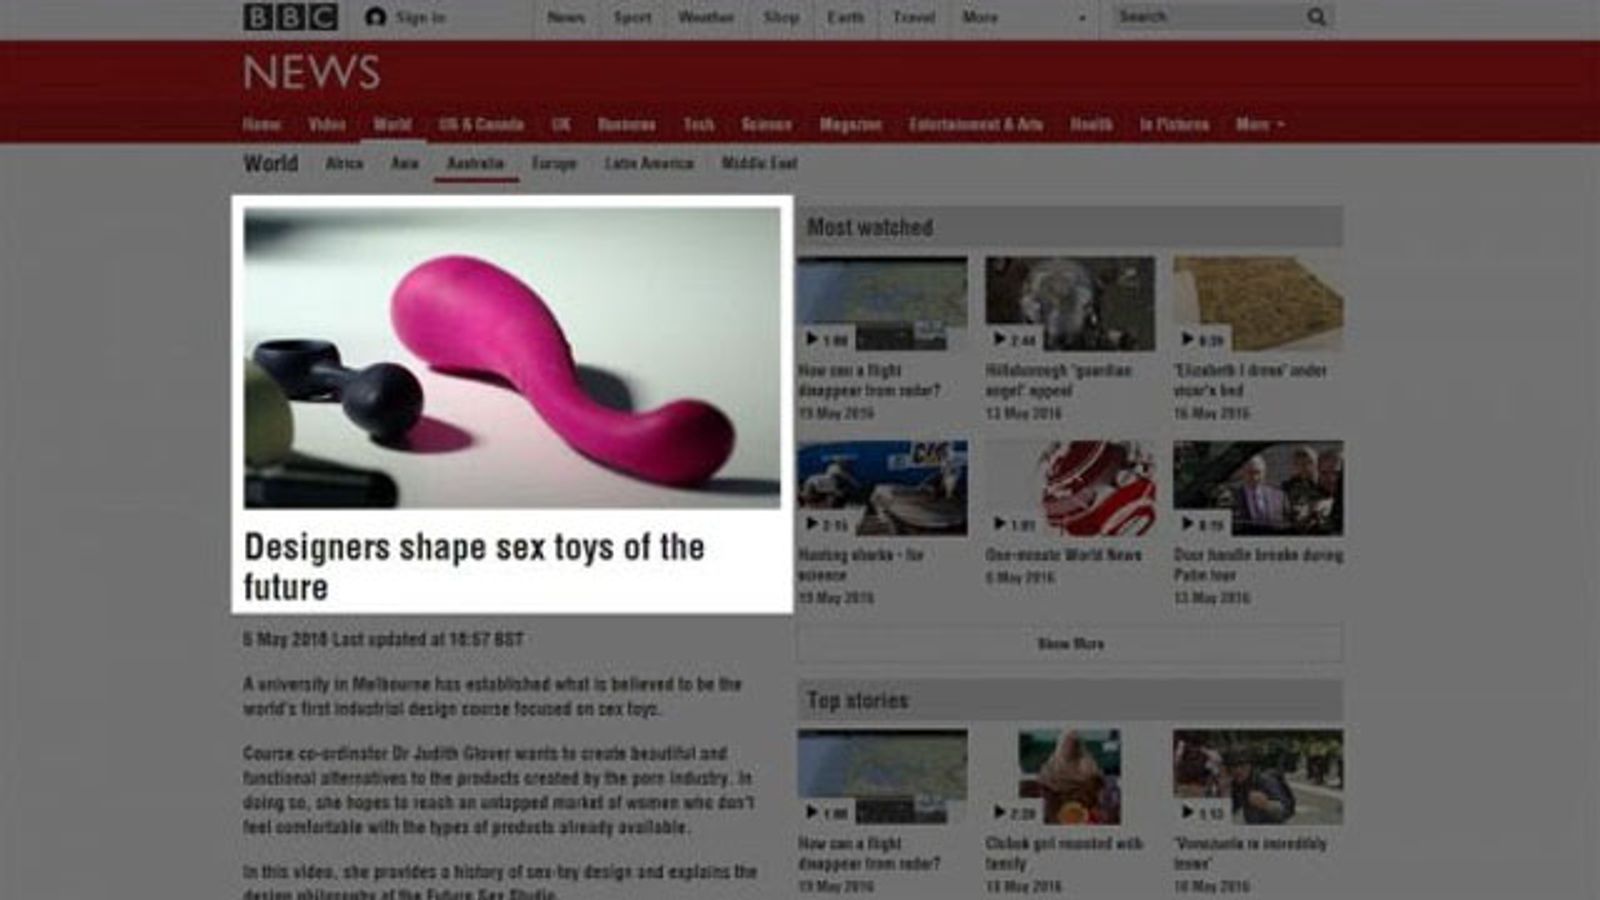 BBC Website Features BMS Factory’s Swan Products